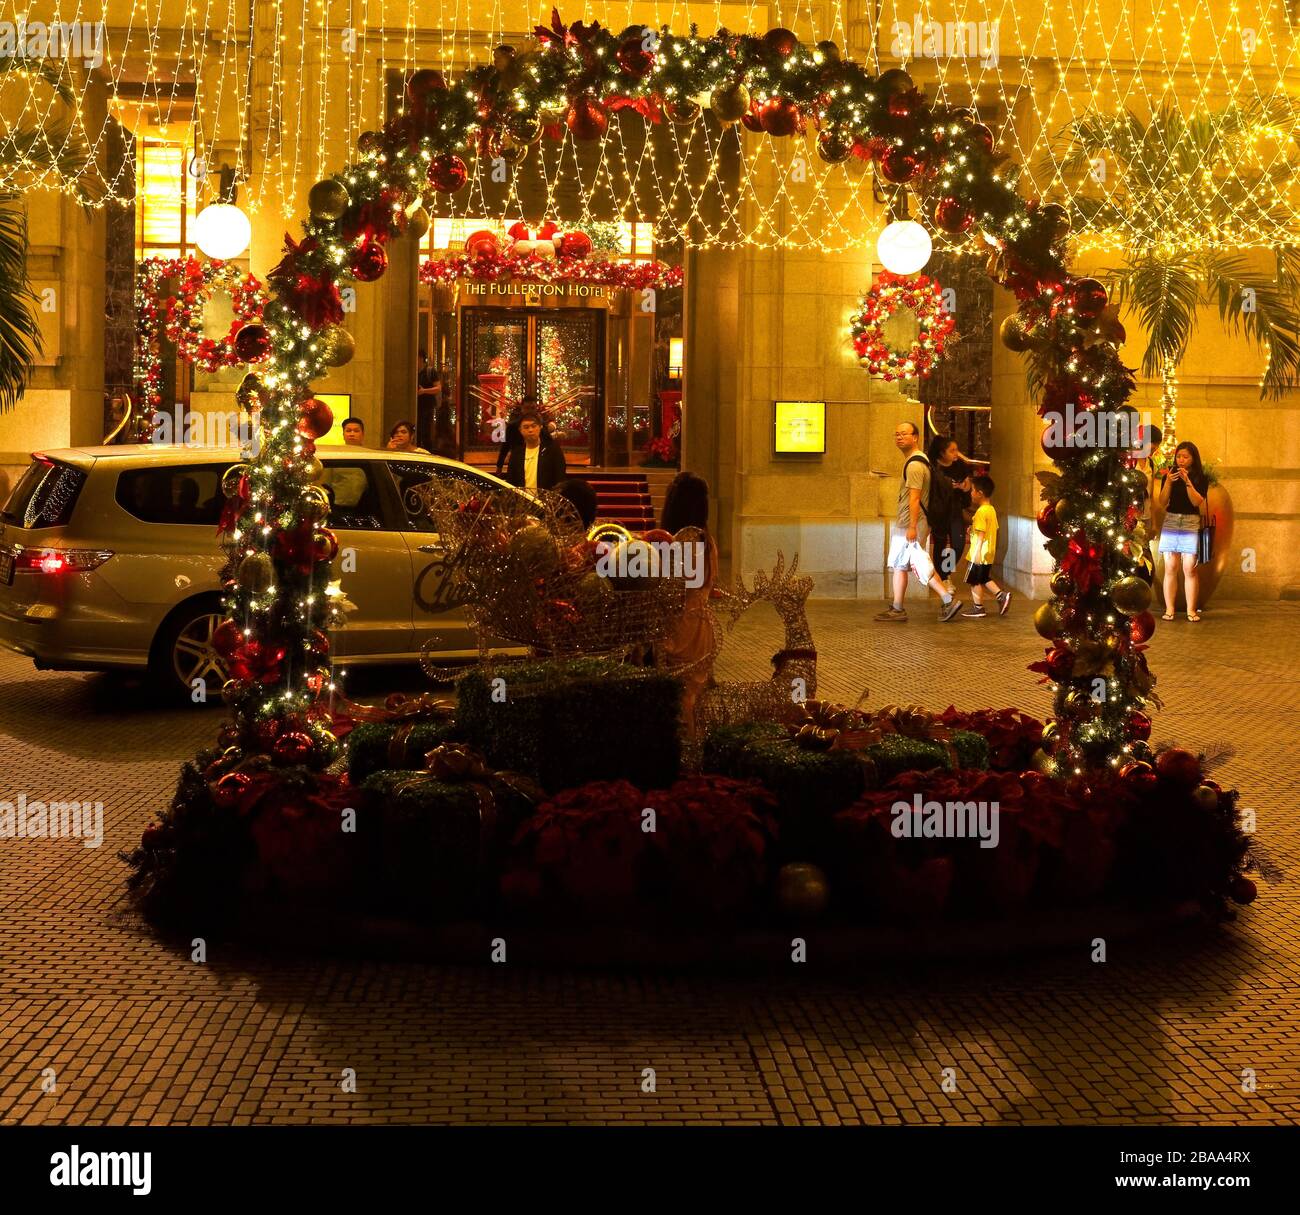 Christmas decorations at the entrance to the Fullerton Hotel, Singapore Stock Photo